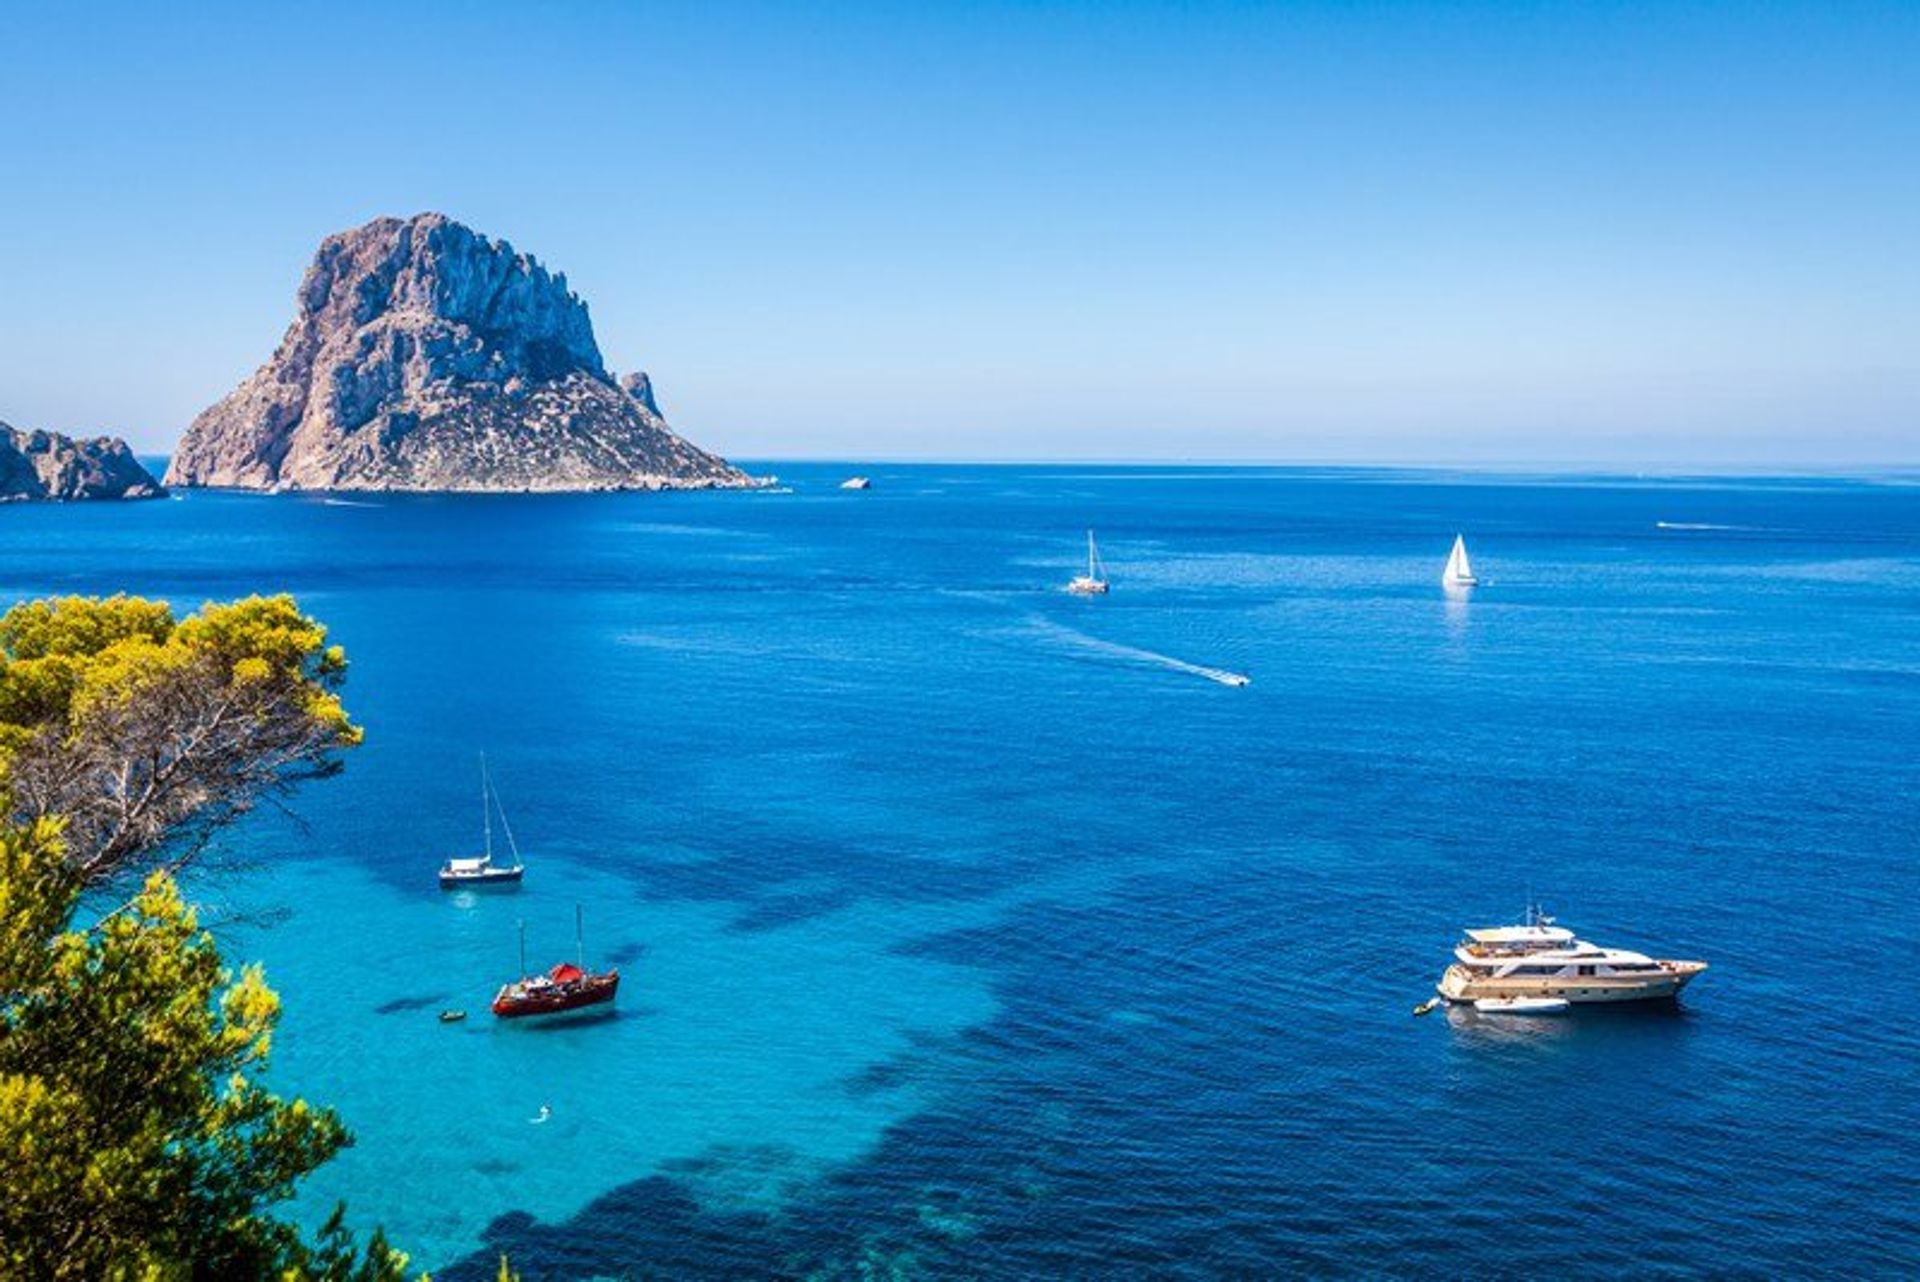 The glistening turquoise waters of Cala d'Hort, Ibiza